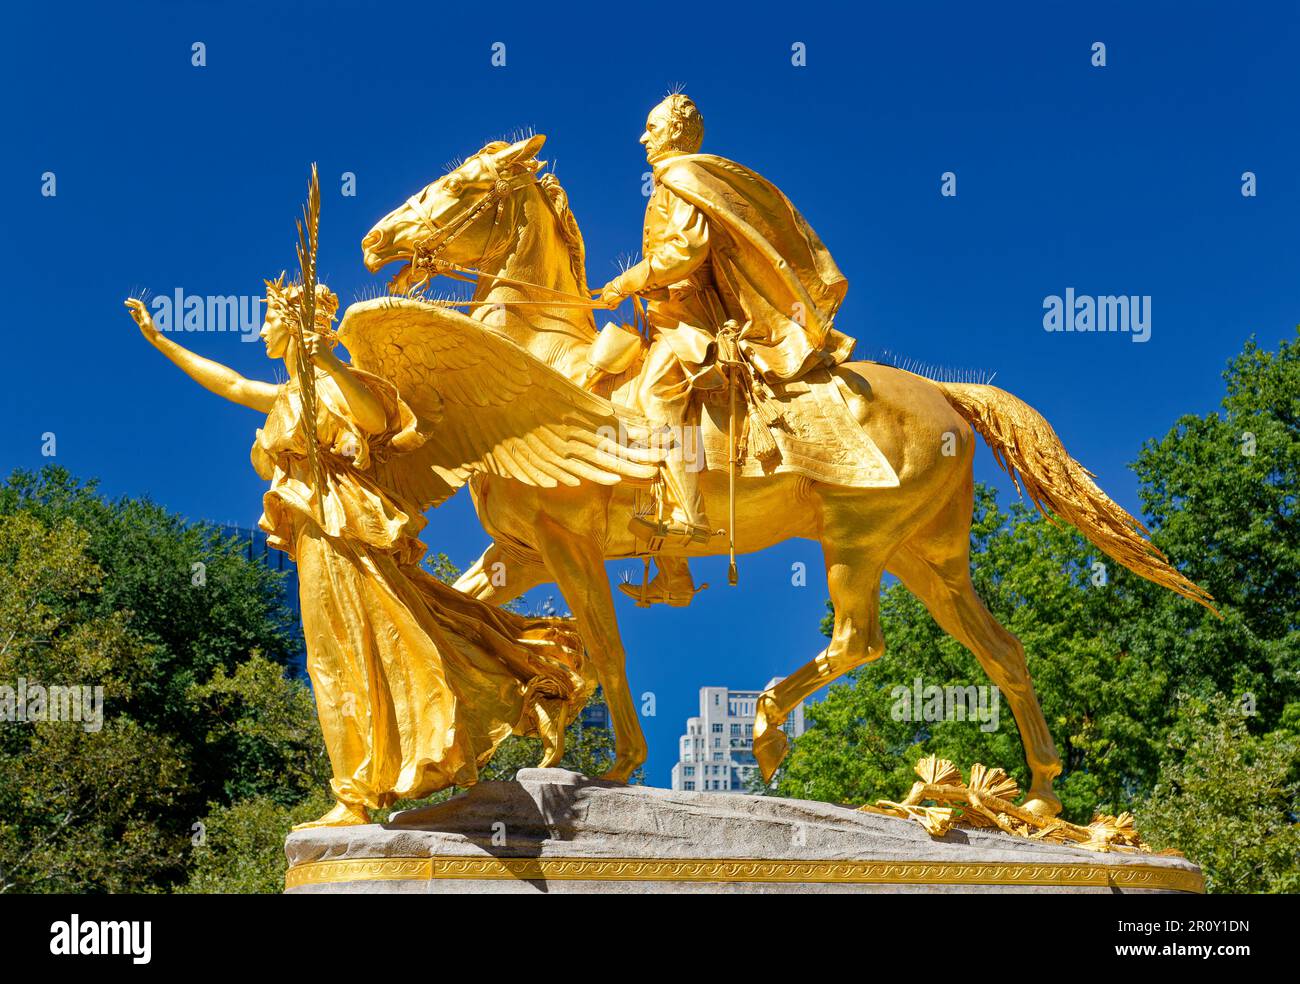 William Tecumseh Sherman Monument, in its re-gilded glory, but crowned in pigeon spikes. Stock Photo